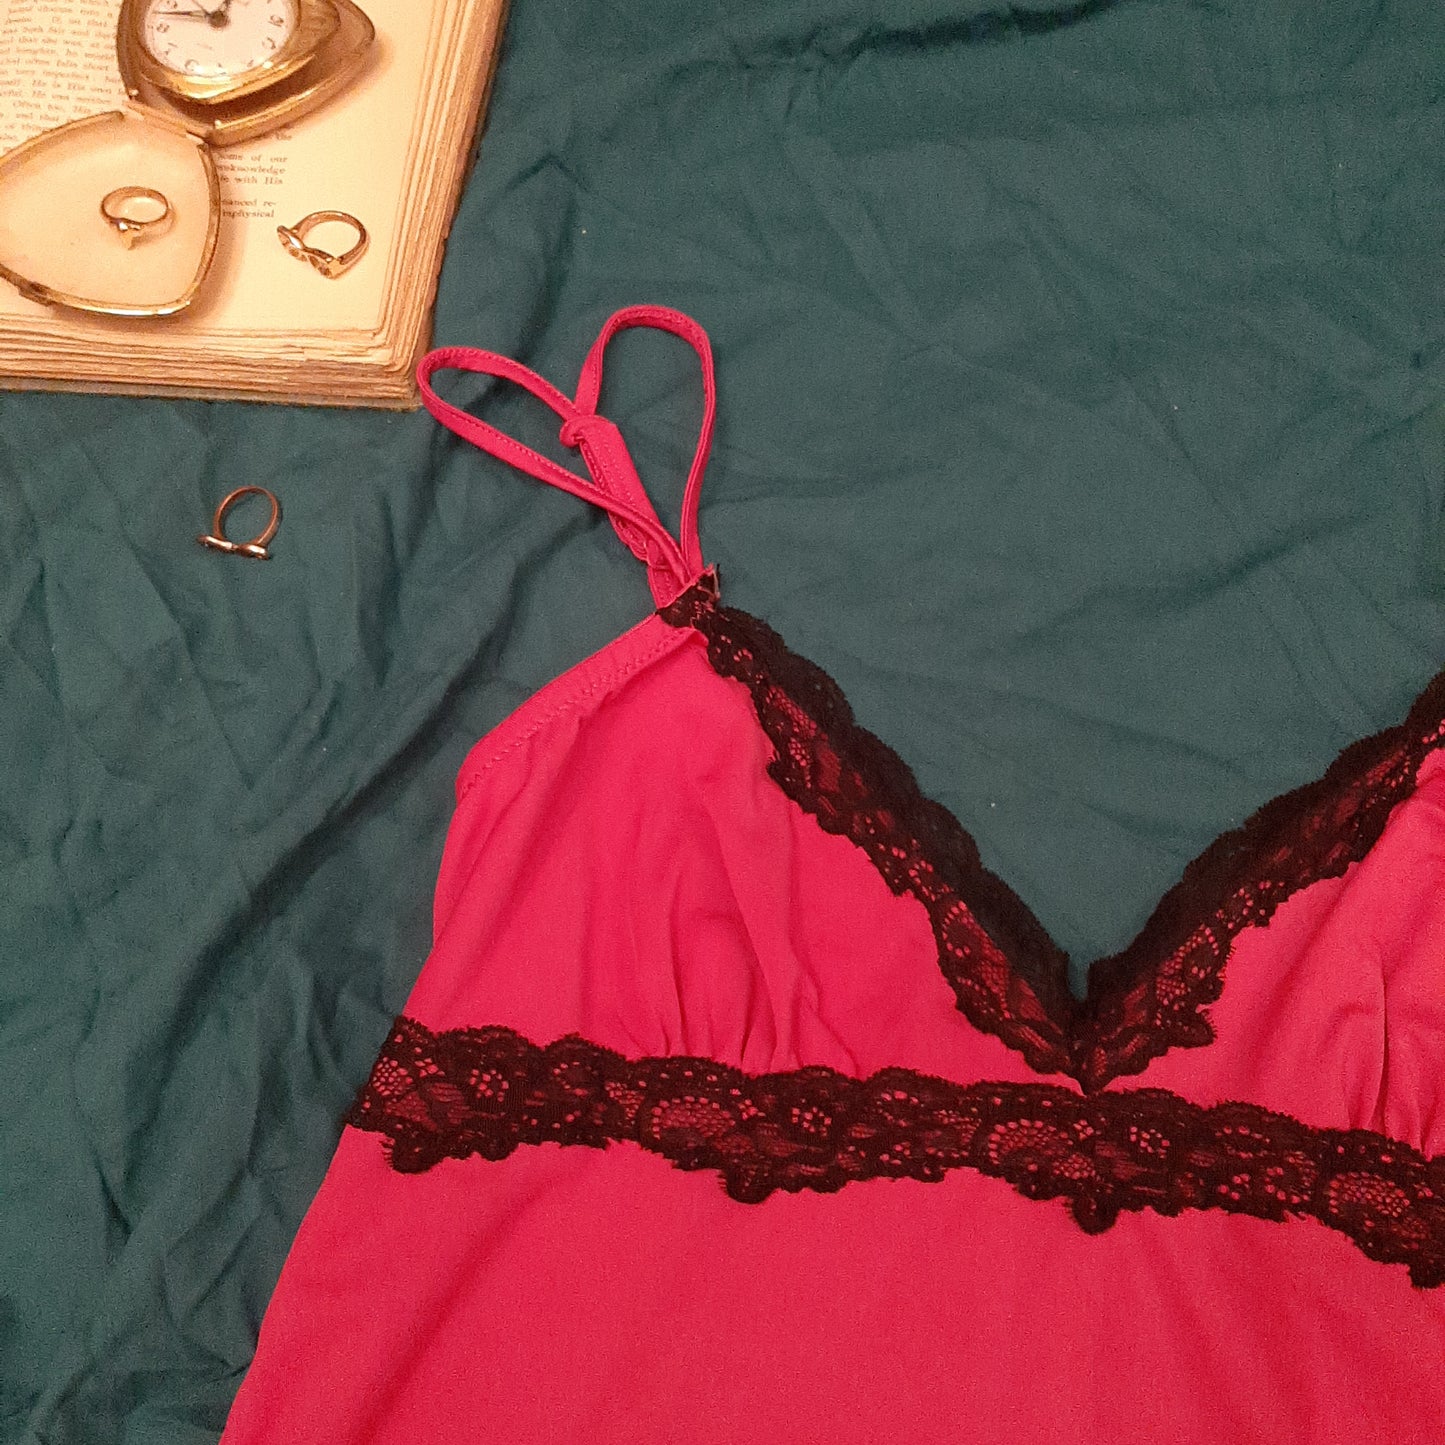 Electric pink tank and black lace trim